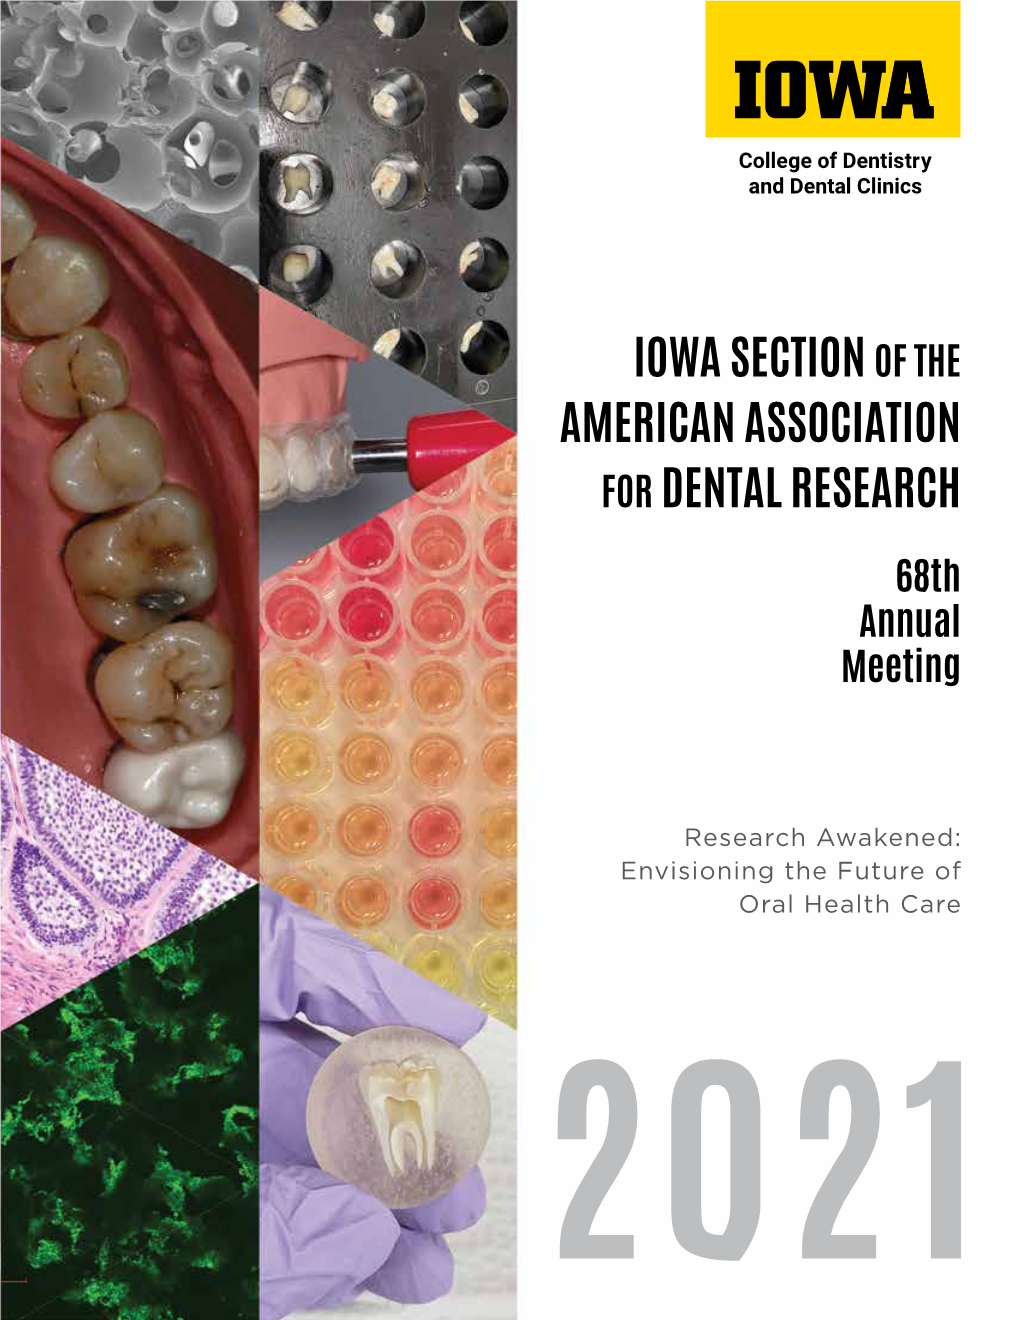 View the Abstracts Presented at the 2021 Annual Meeting of the Iowa